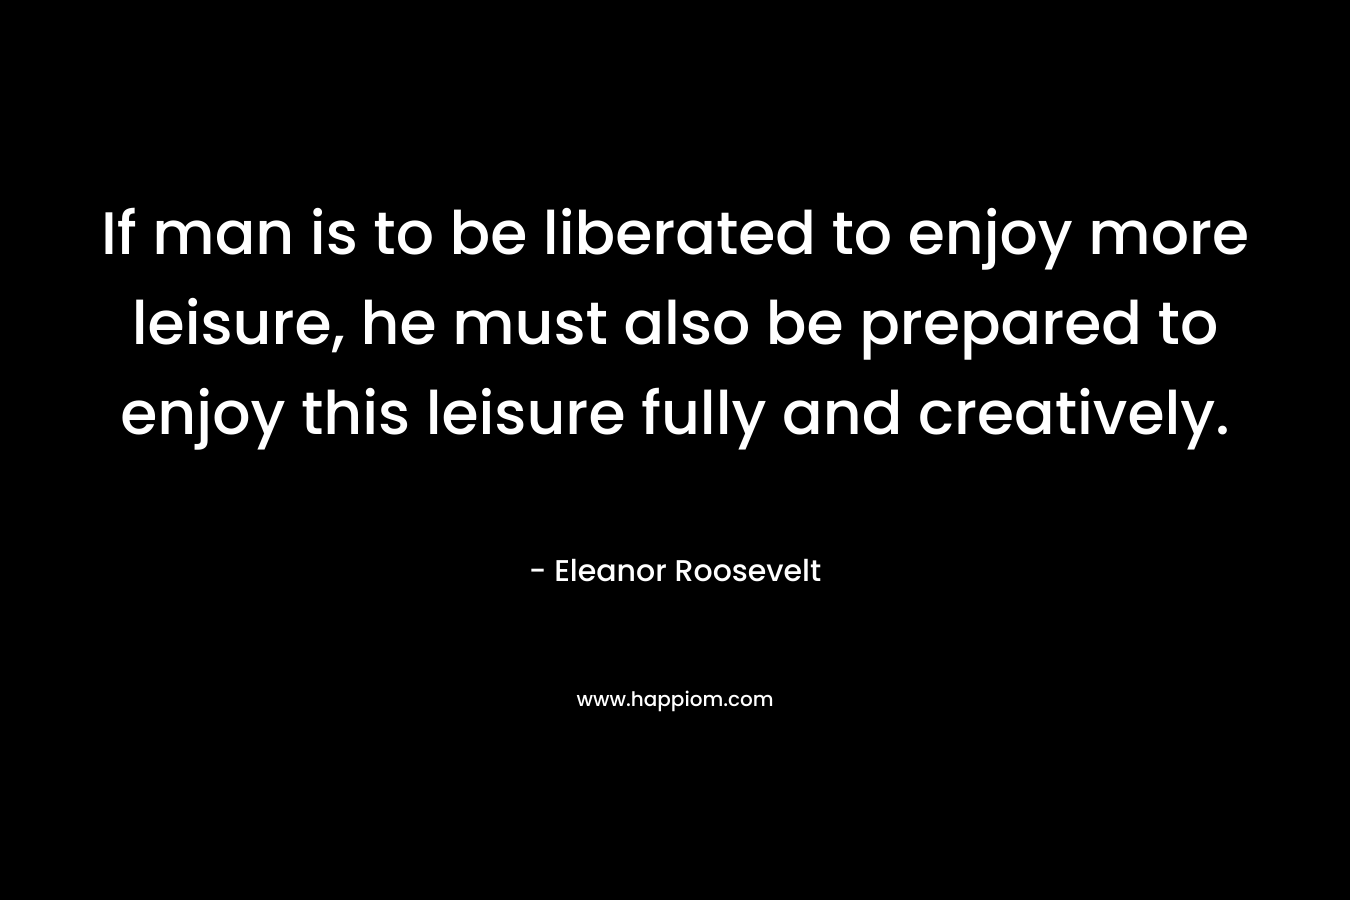 If man is to be liberated to enjoy more leisure, he must also be prepared to enjoy this leisure fully and creatively.